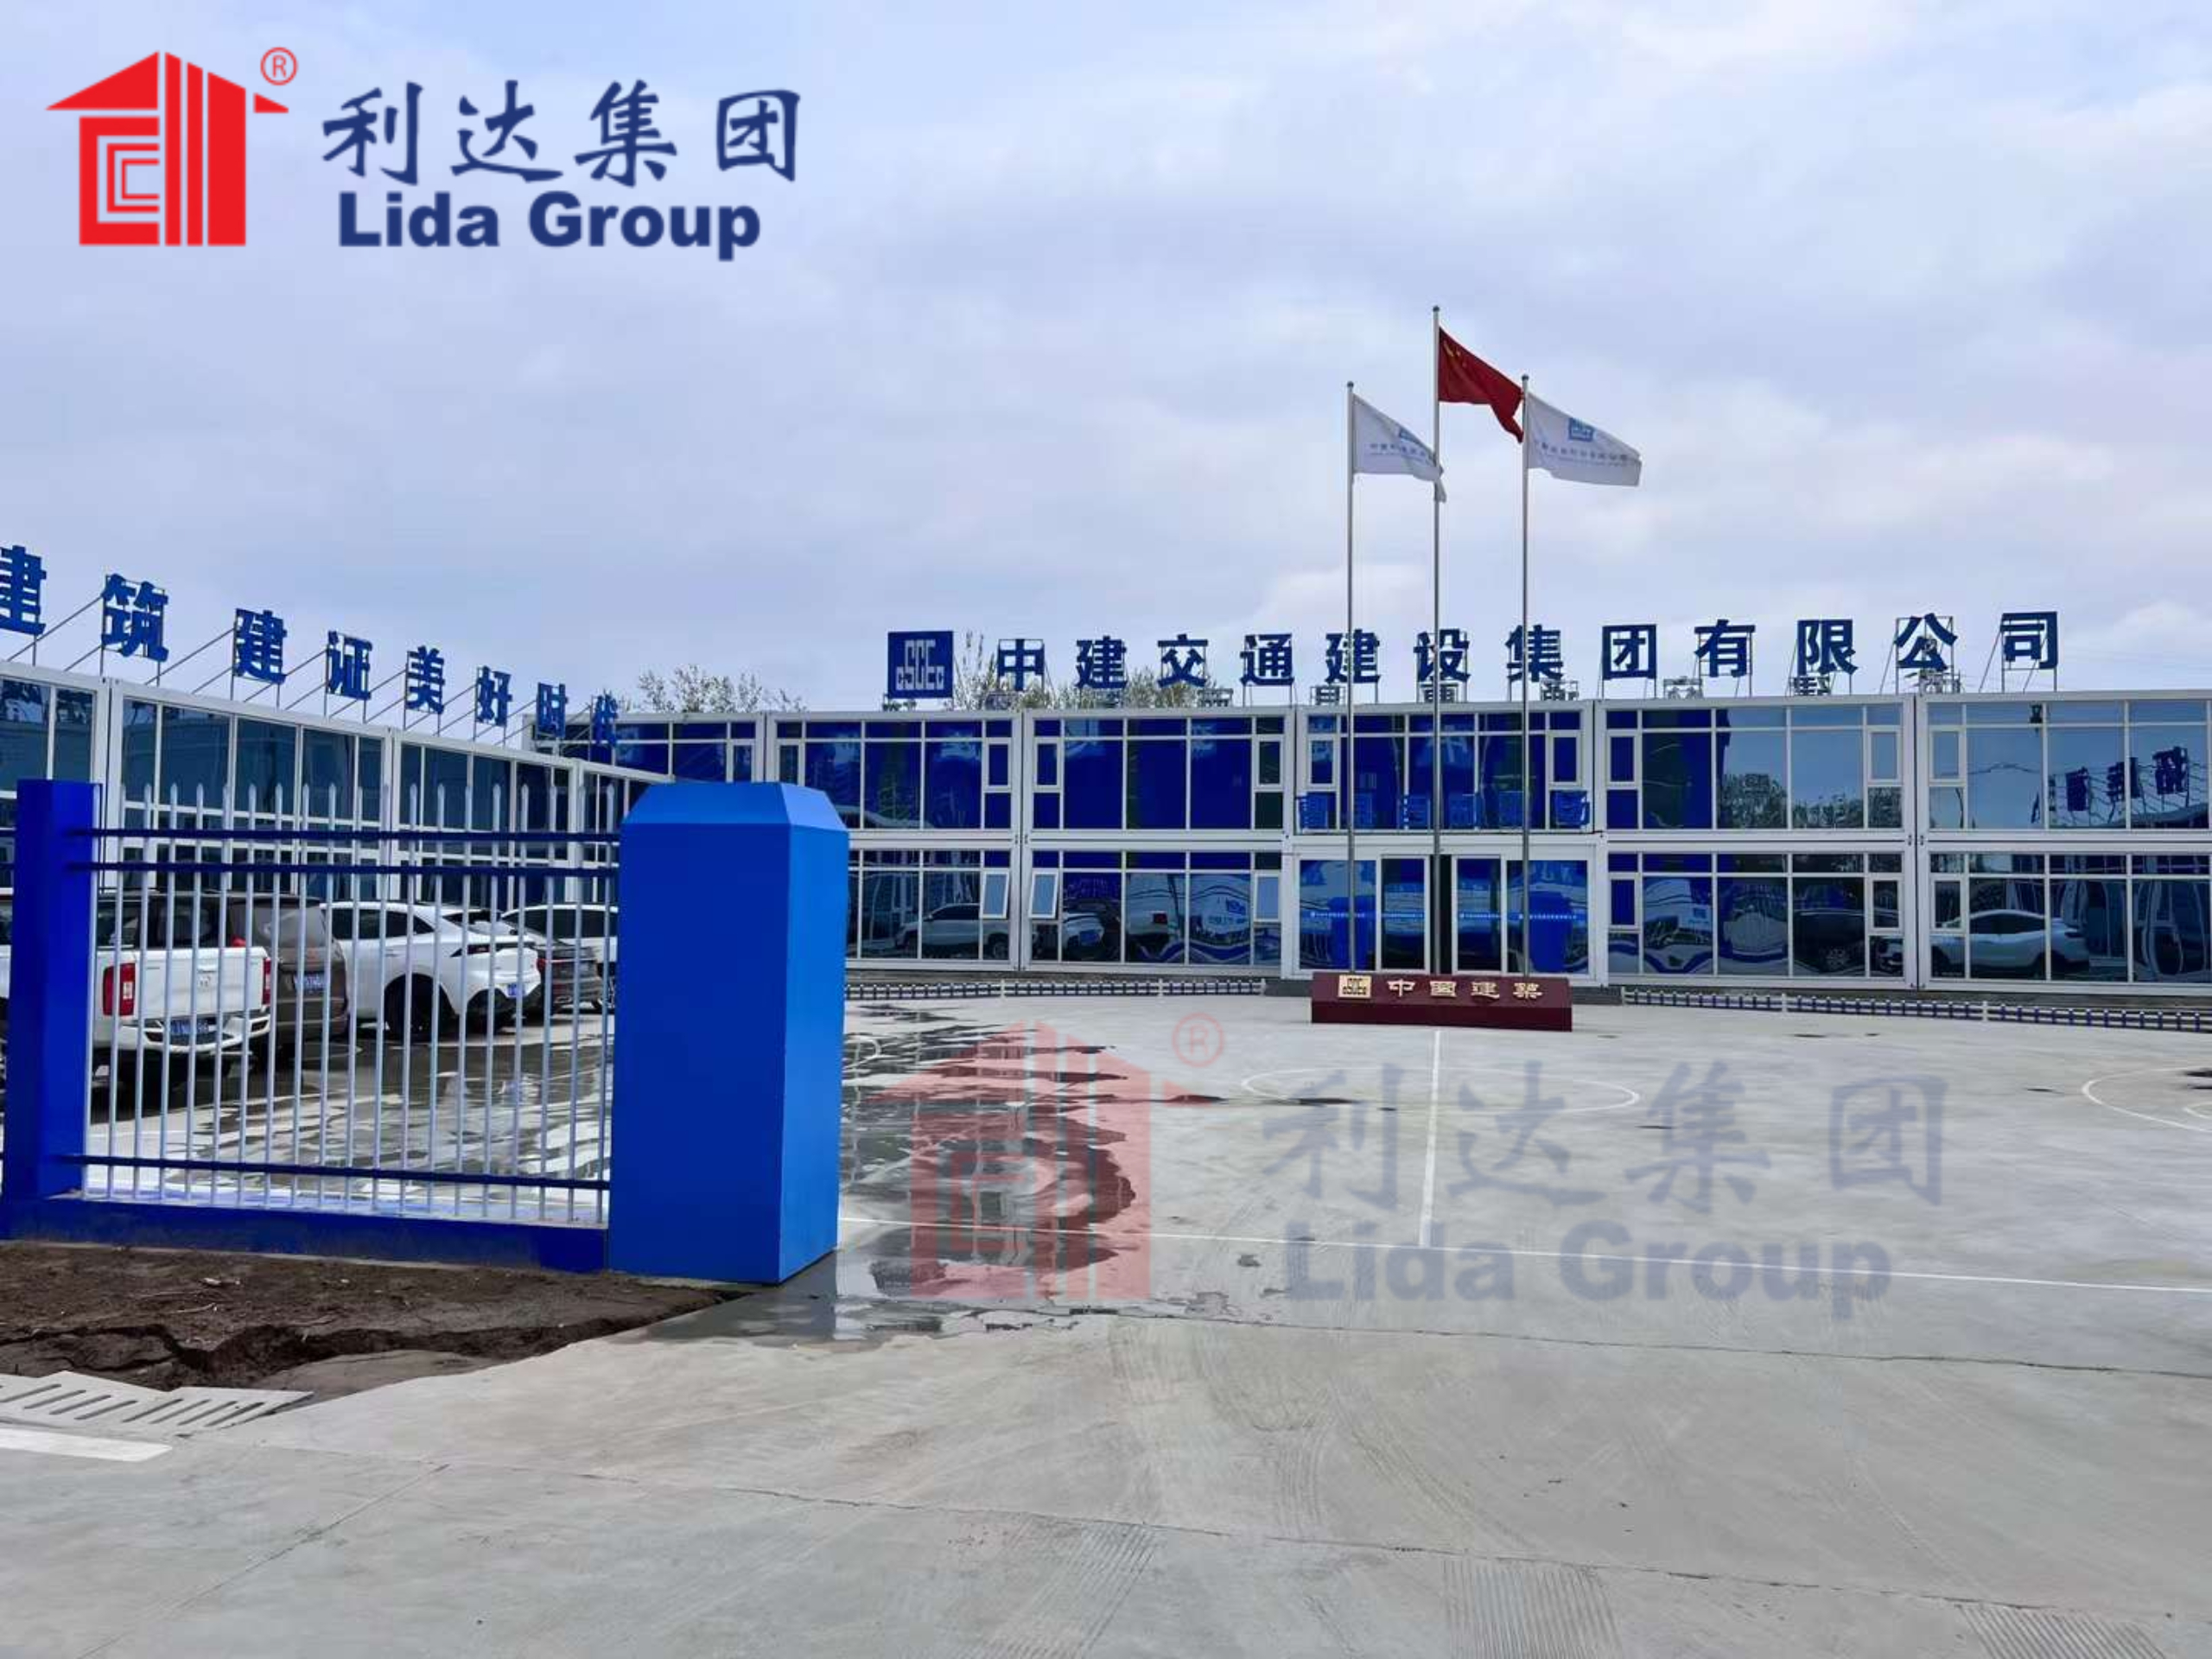 Lida Group CEO discusses strategic vision to disrupt traditional construction industry with container homes, reveals plans to build thousands of standardized prefab container apartment units per year.